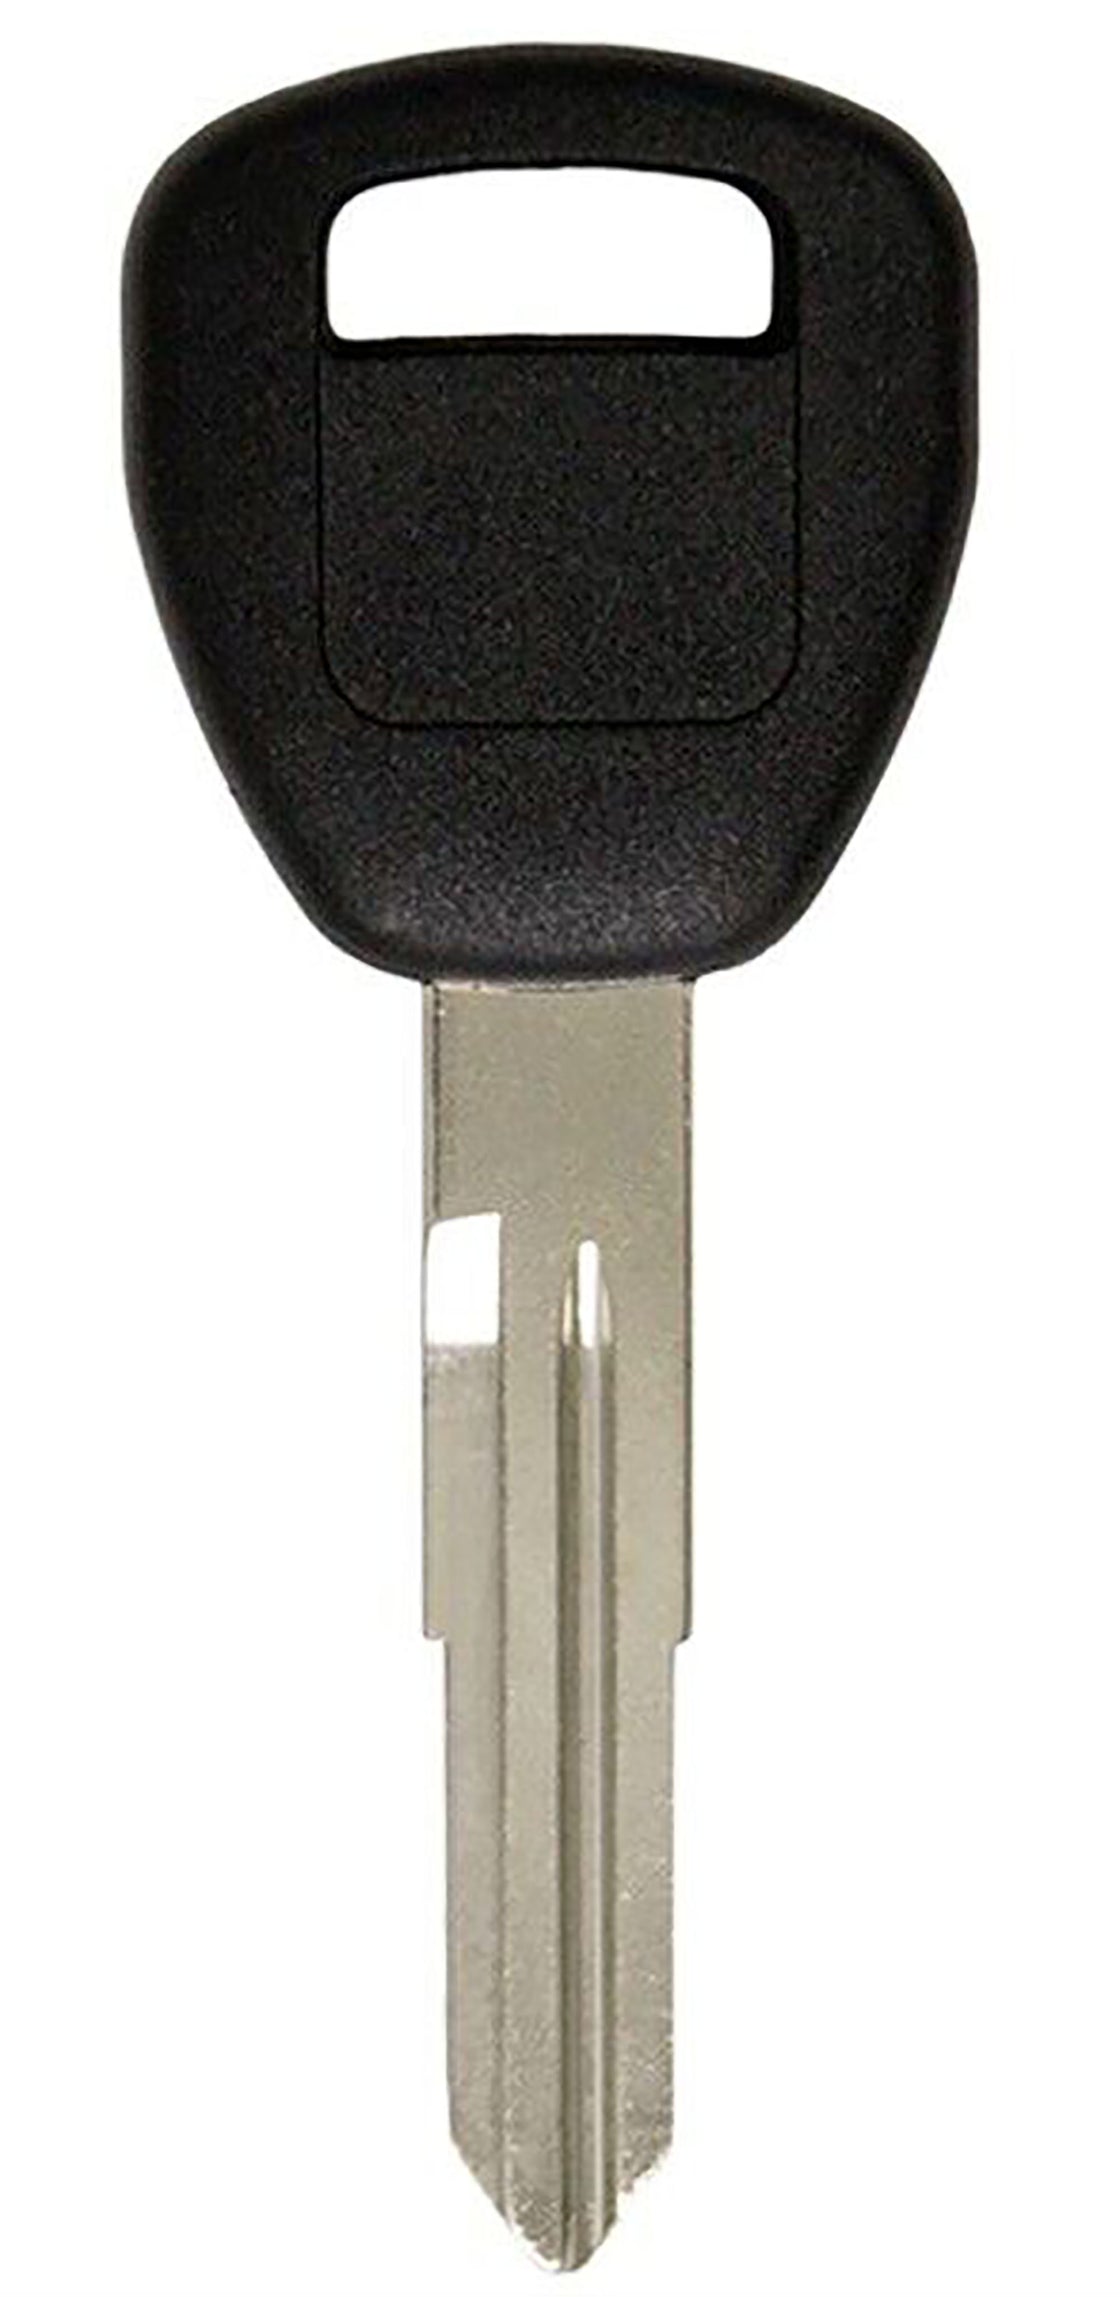 1x New Replacement Transponder Key Compatible with & Fit For Honda Acura Vehicles HD106PT - MPN HD106-03